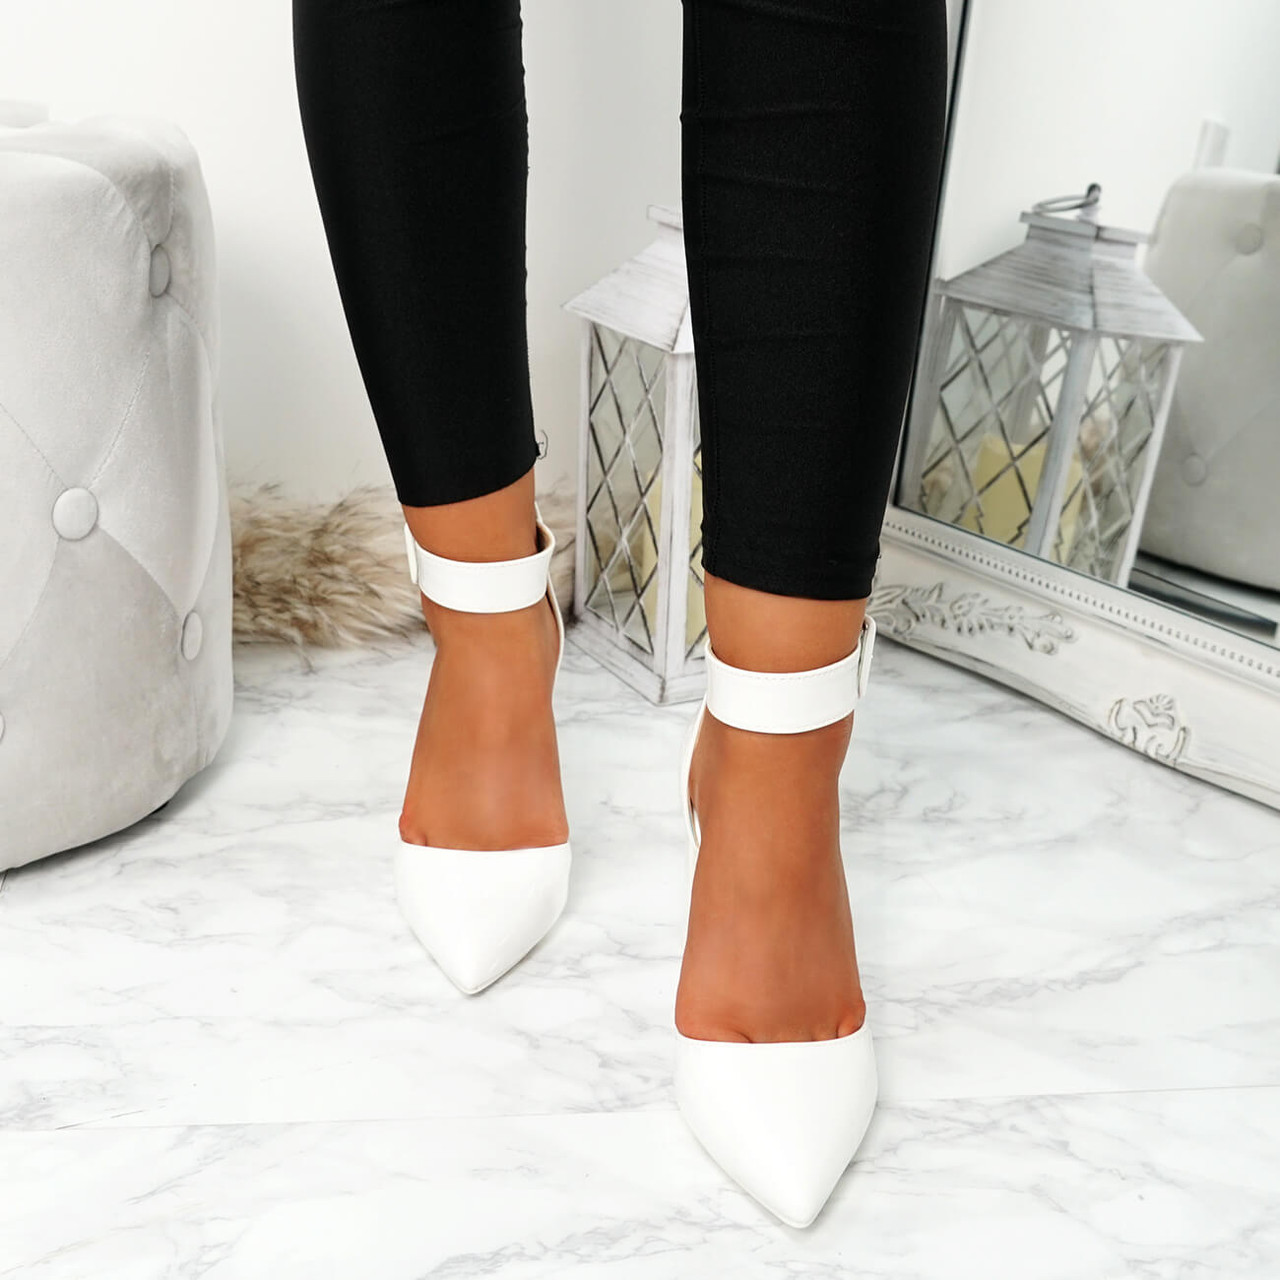 Enna White Pu Block Heel Pumps - Pointed Court Shoes - Buy Now, Pay Later